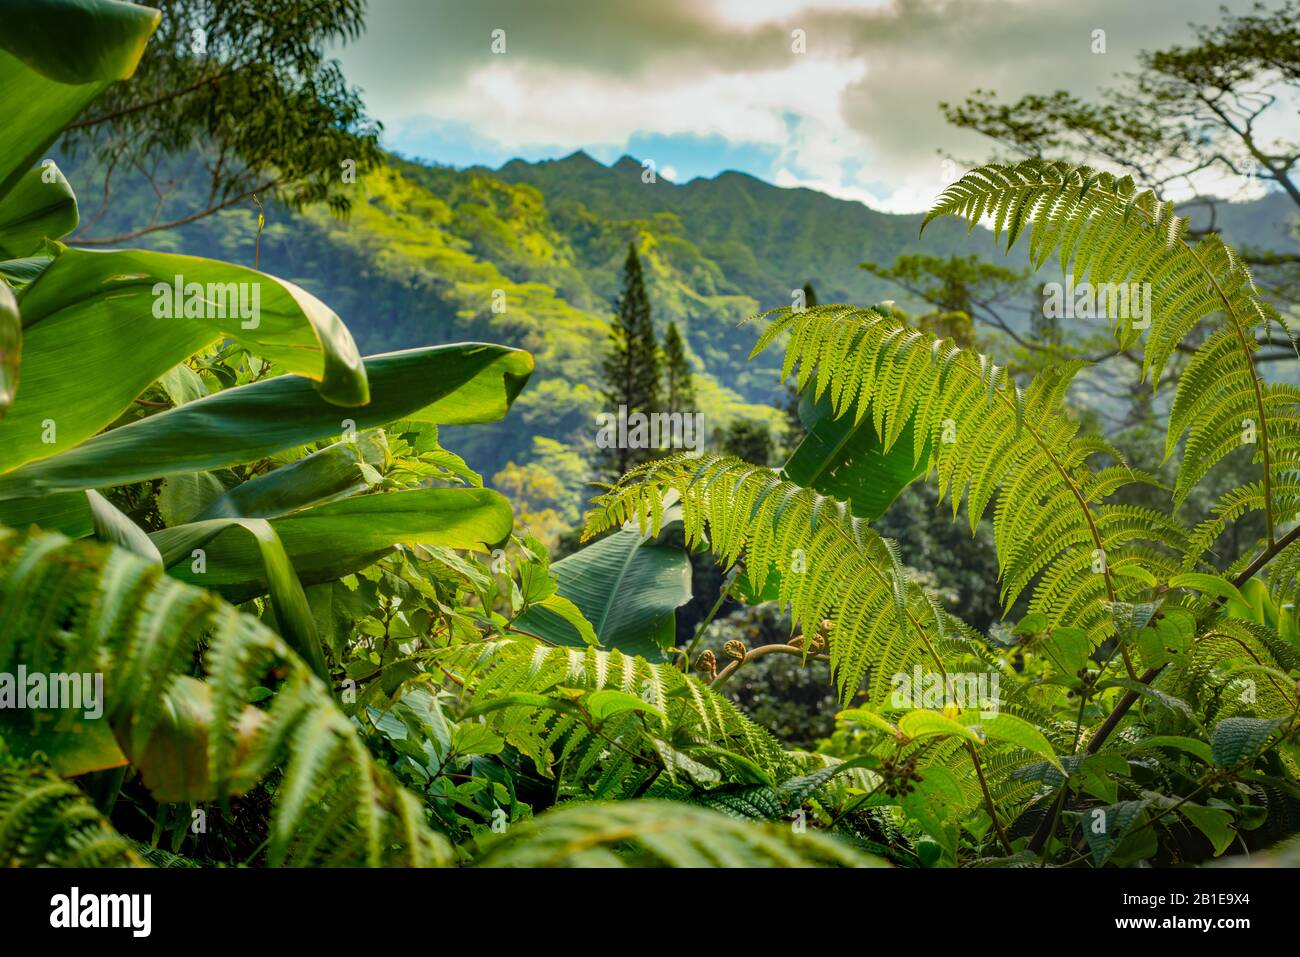 Lush Foliage in a Tropical Rainforest With Mountains in the Background in Hawaii Stock Photo